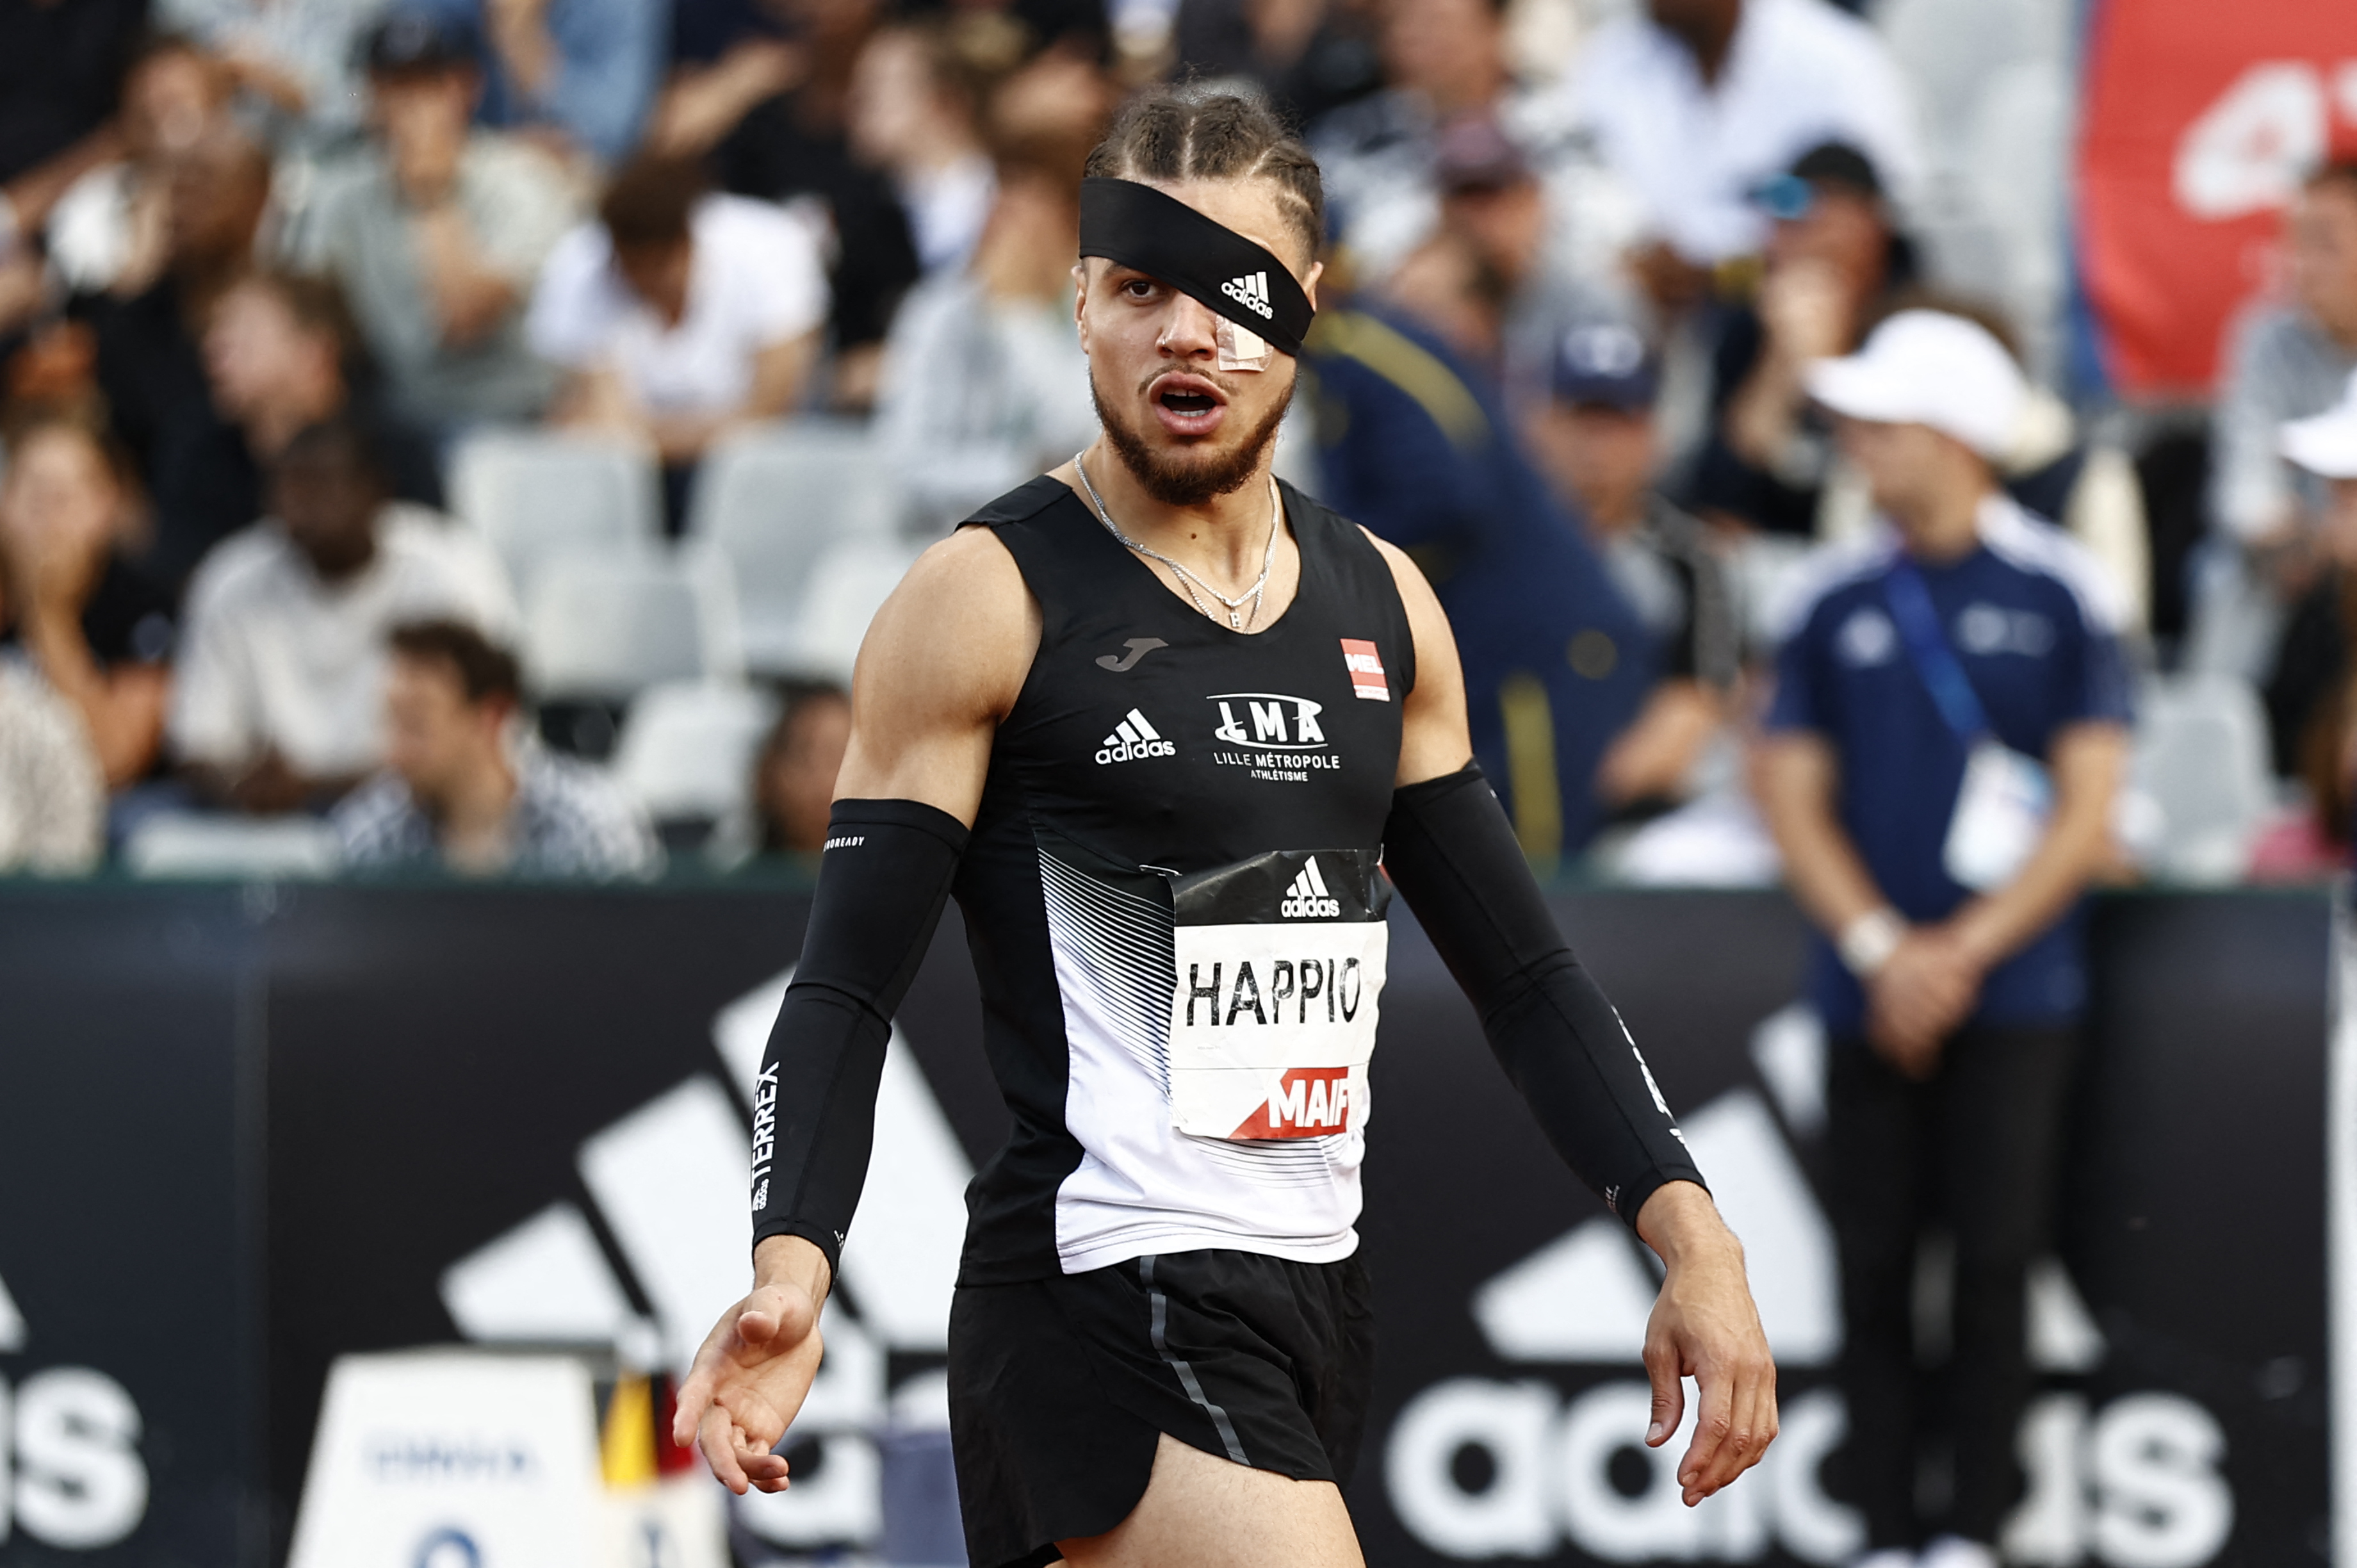 Wilfried Happio wins French 400-meter hurdles title 20 minutes after being attacked